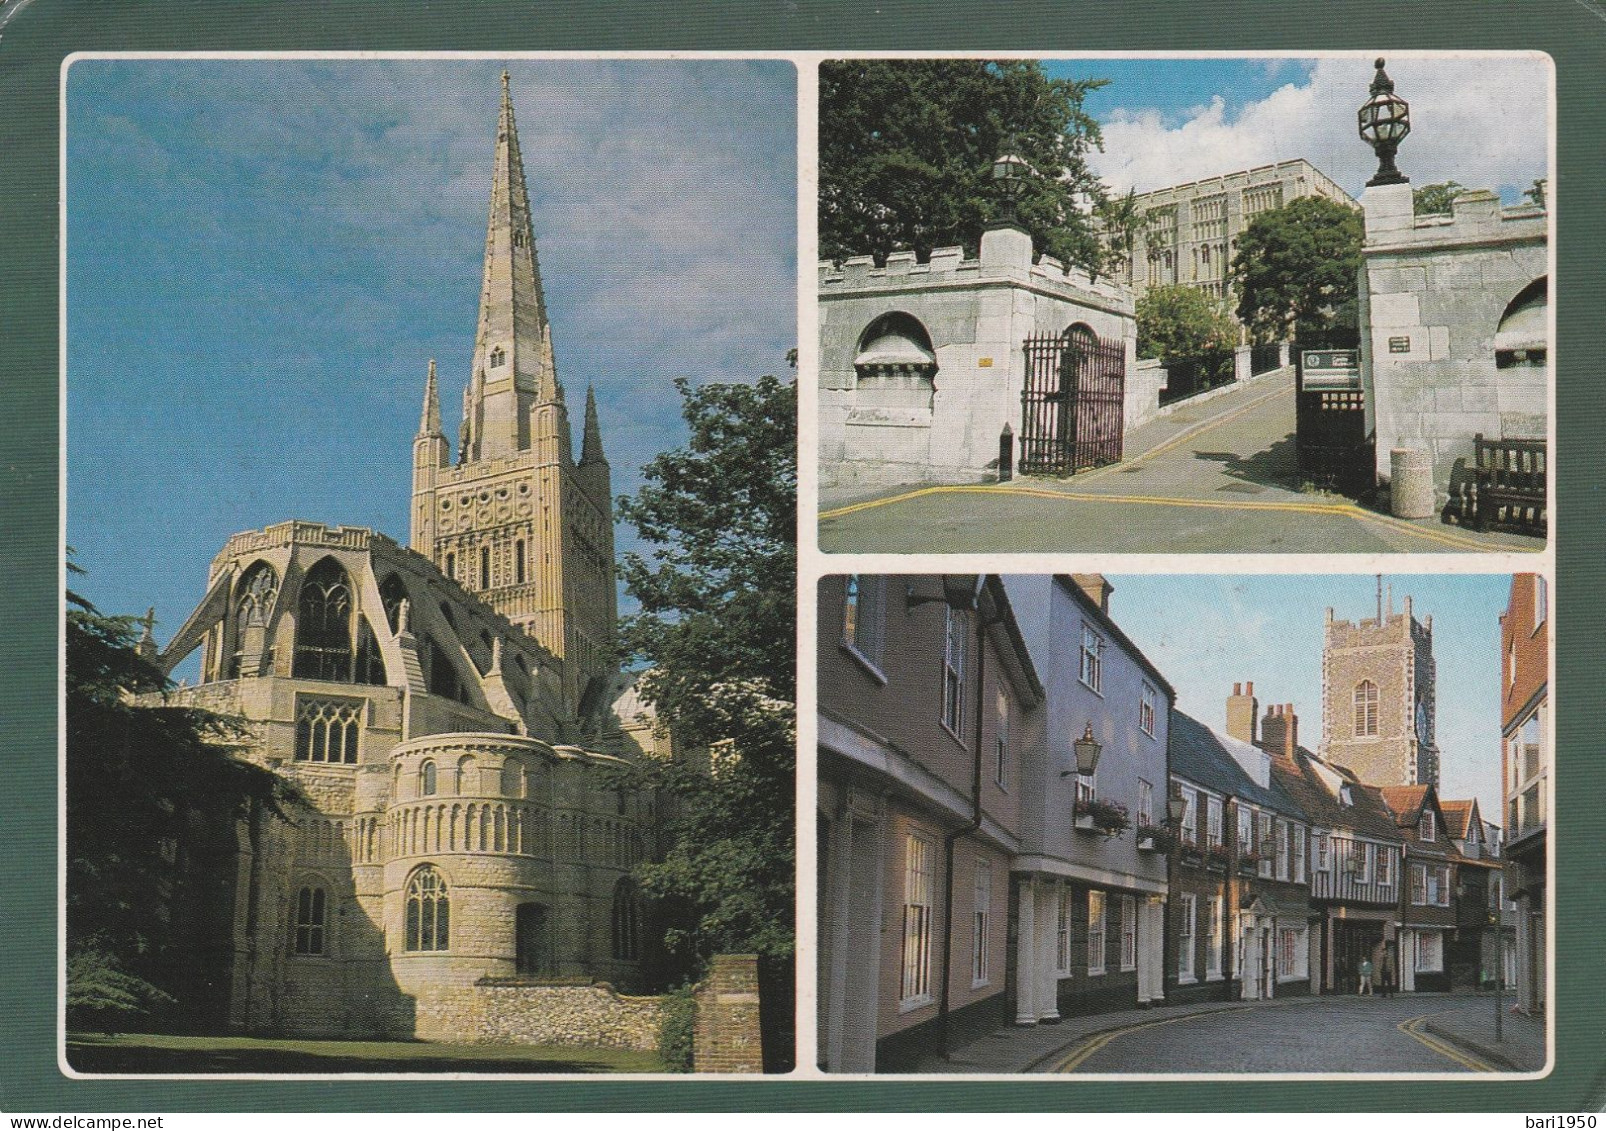 NORWICH CATHEDRAL, NORWICH CASTLE, AND PRINCES STREET - Norwich